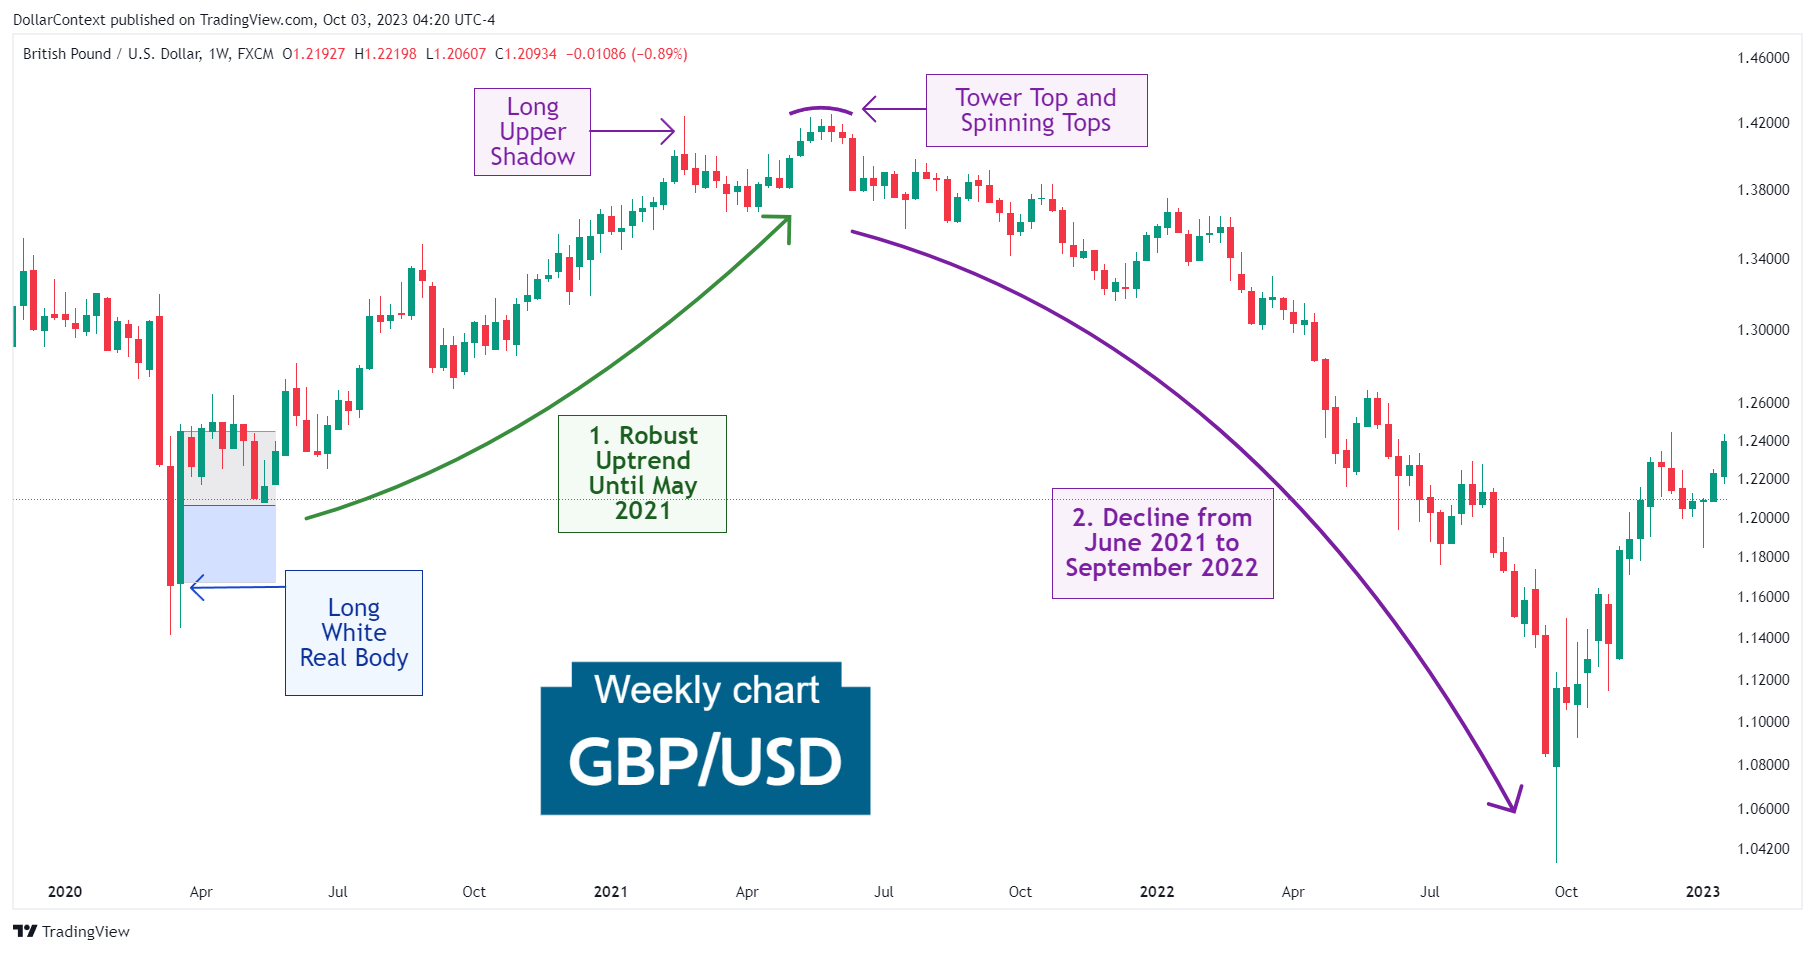 GBP/USD: Decline Until September 2022 (Weekly Chart)